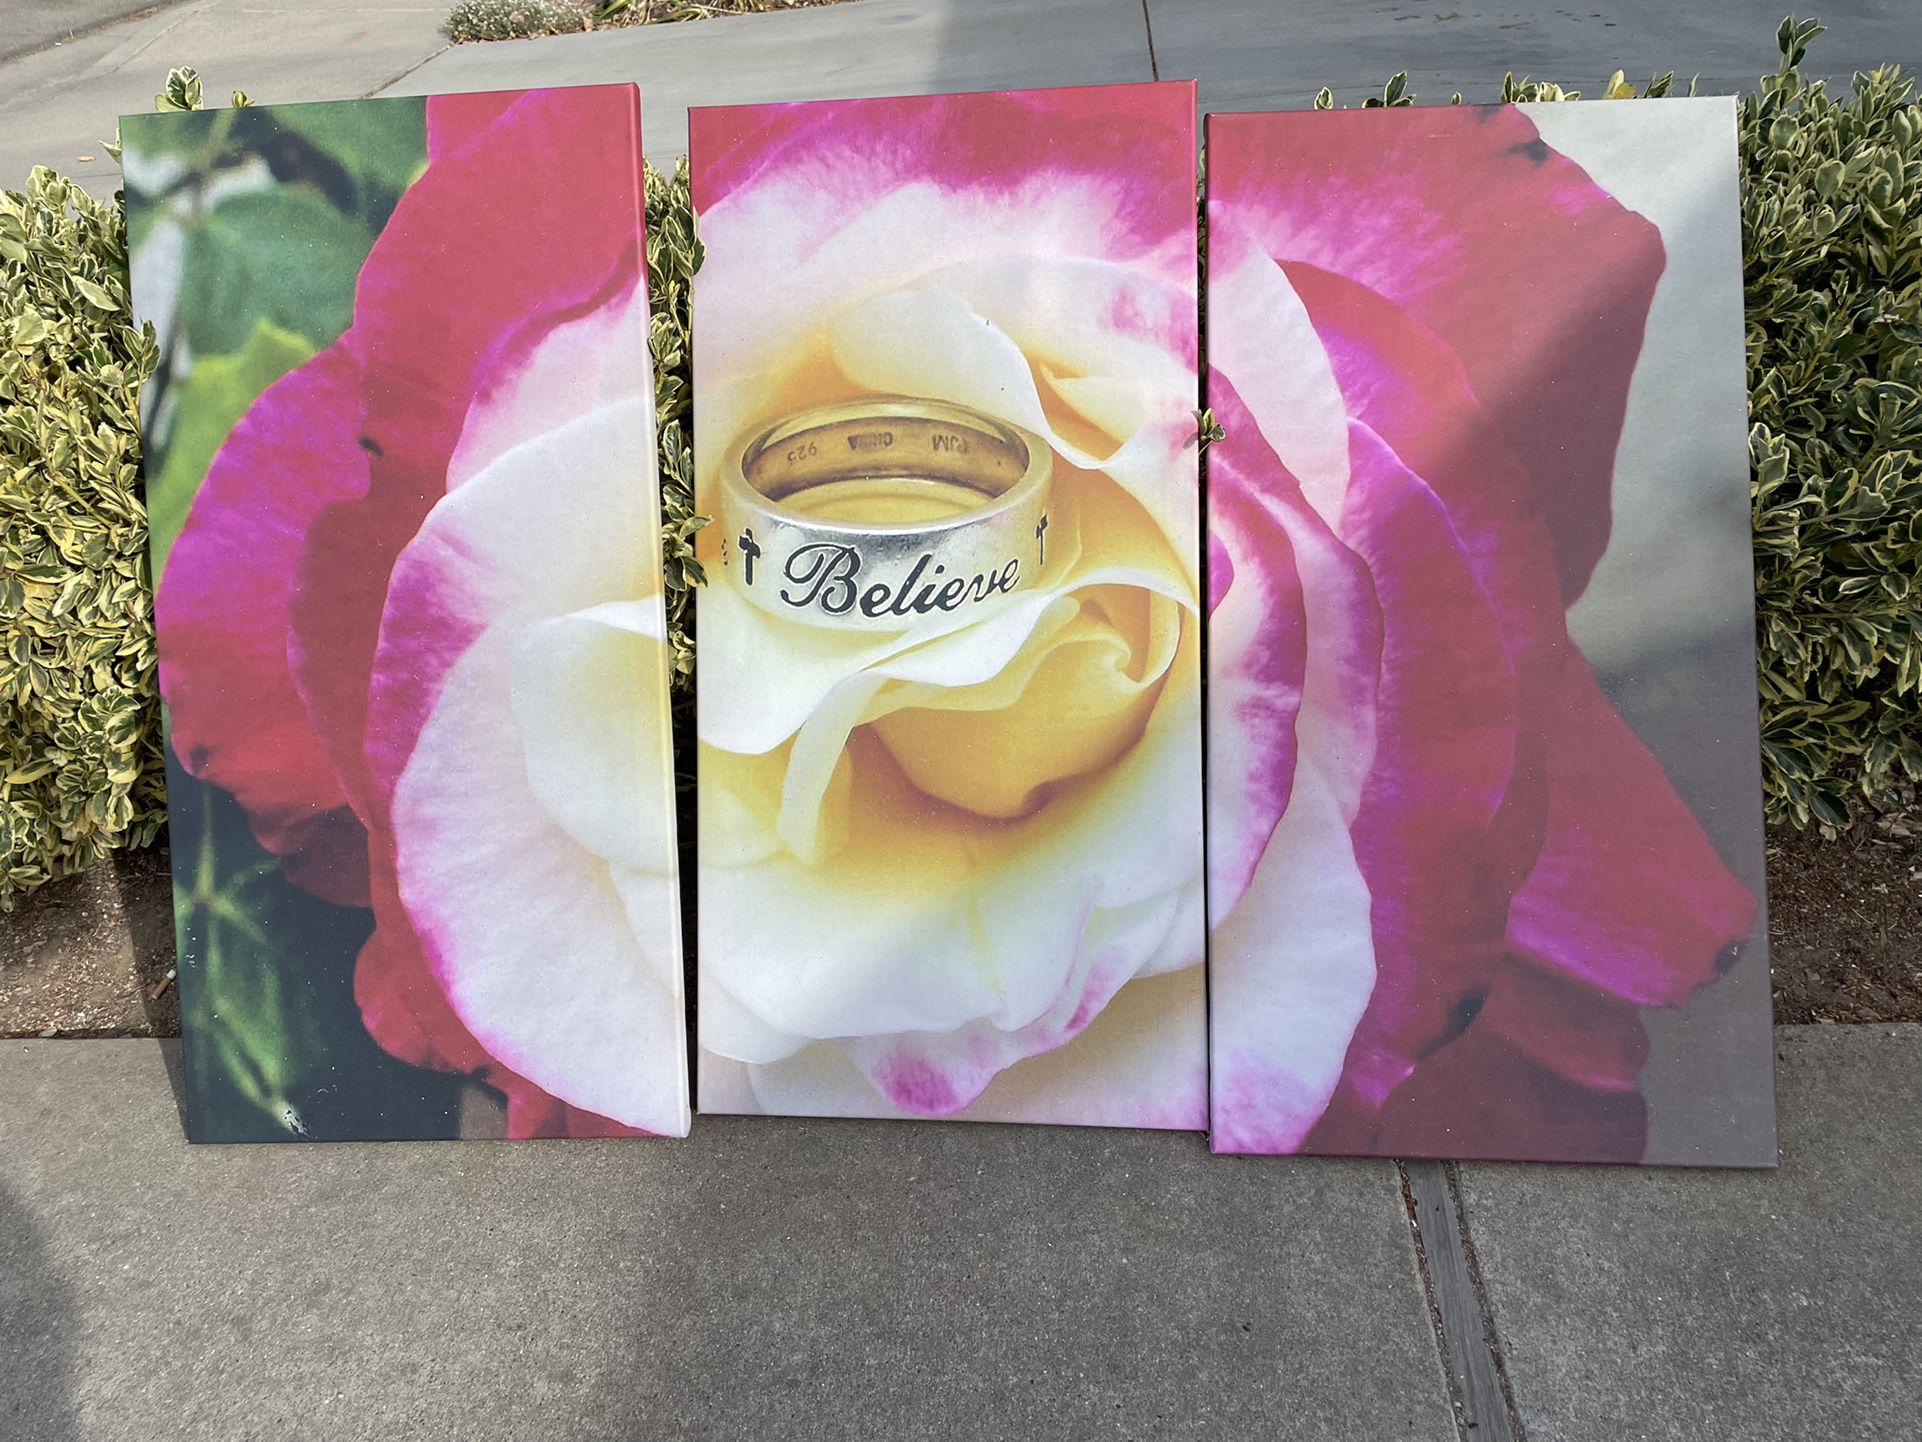 Double Delight Rose Wall Picture